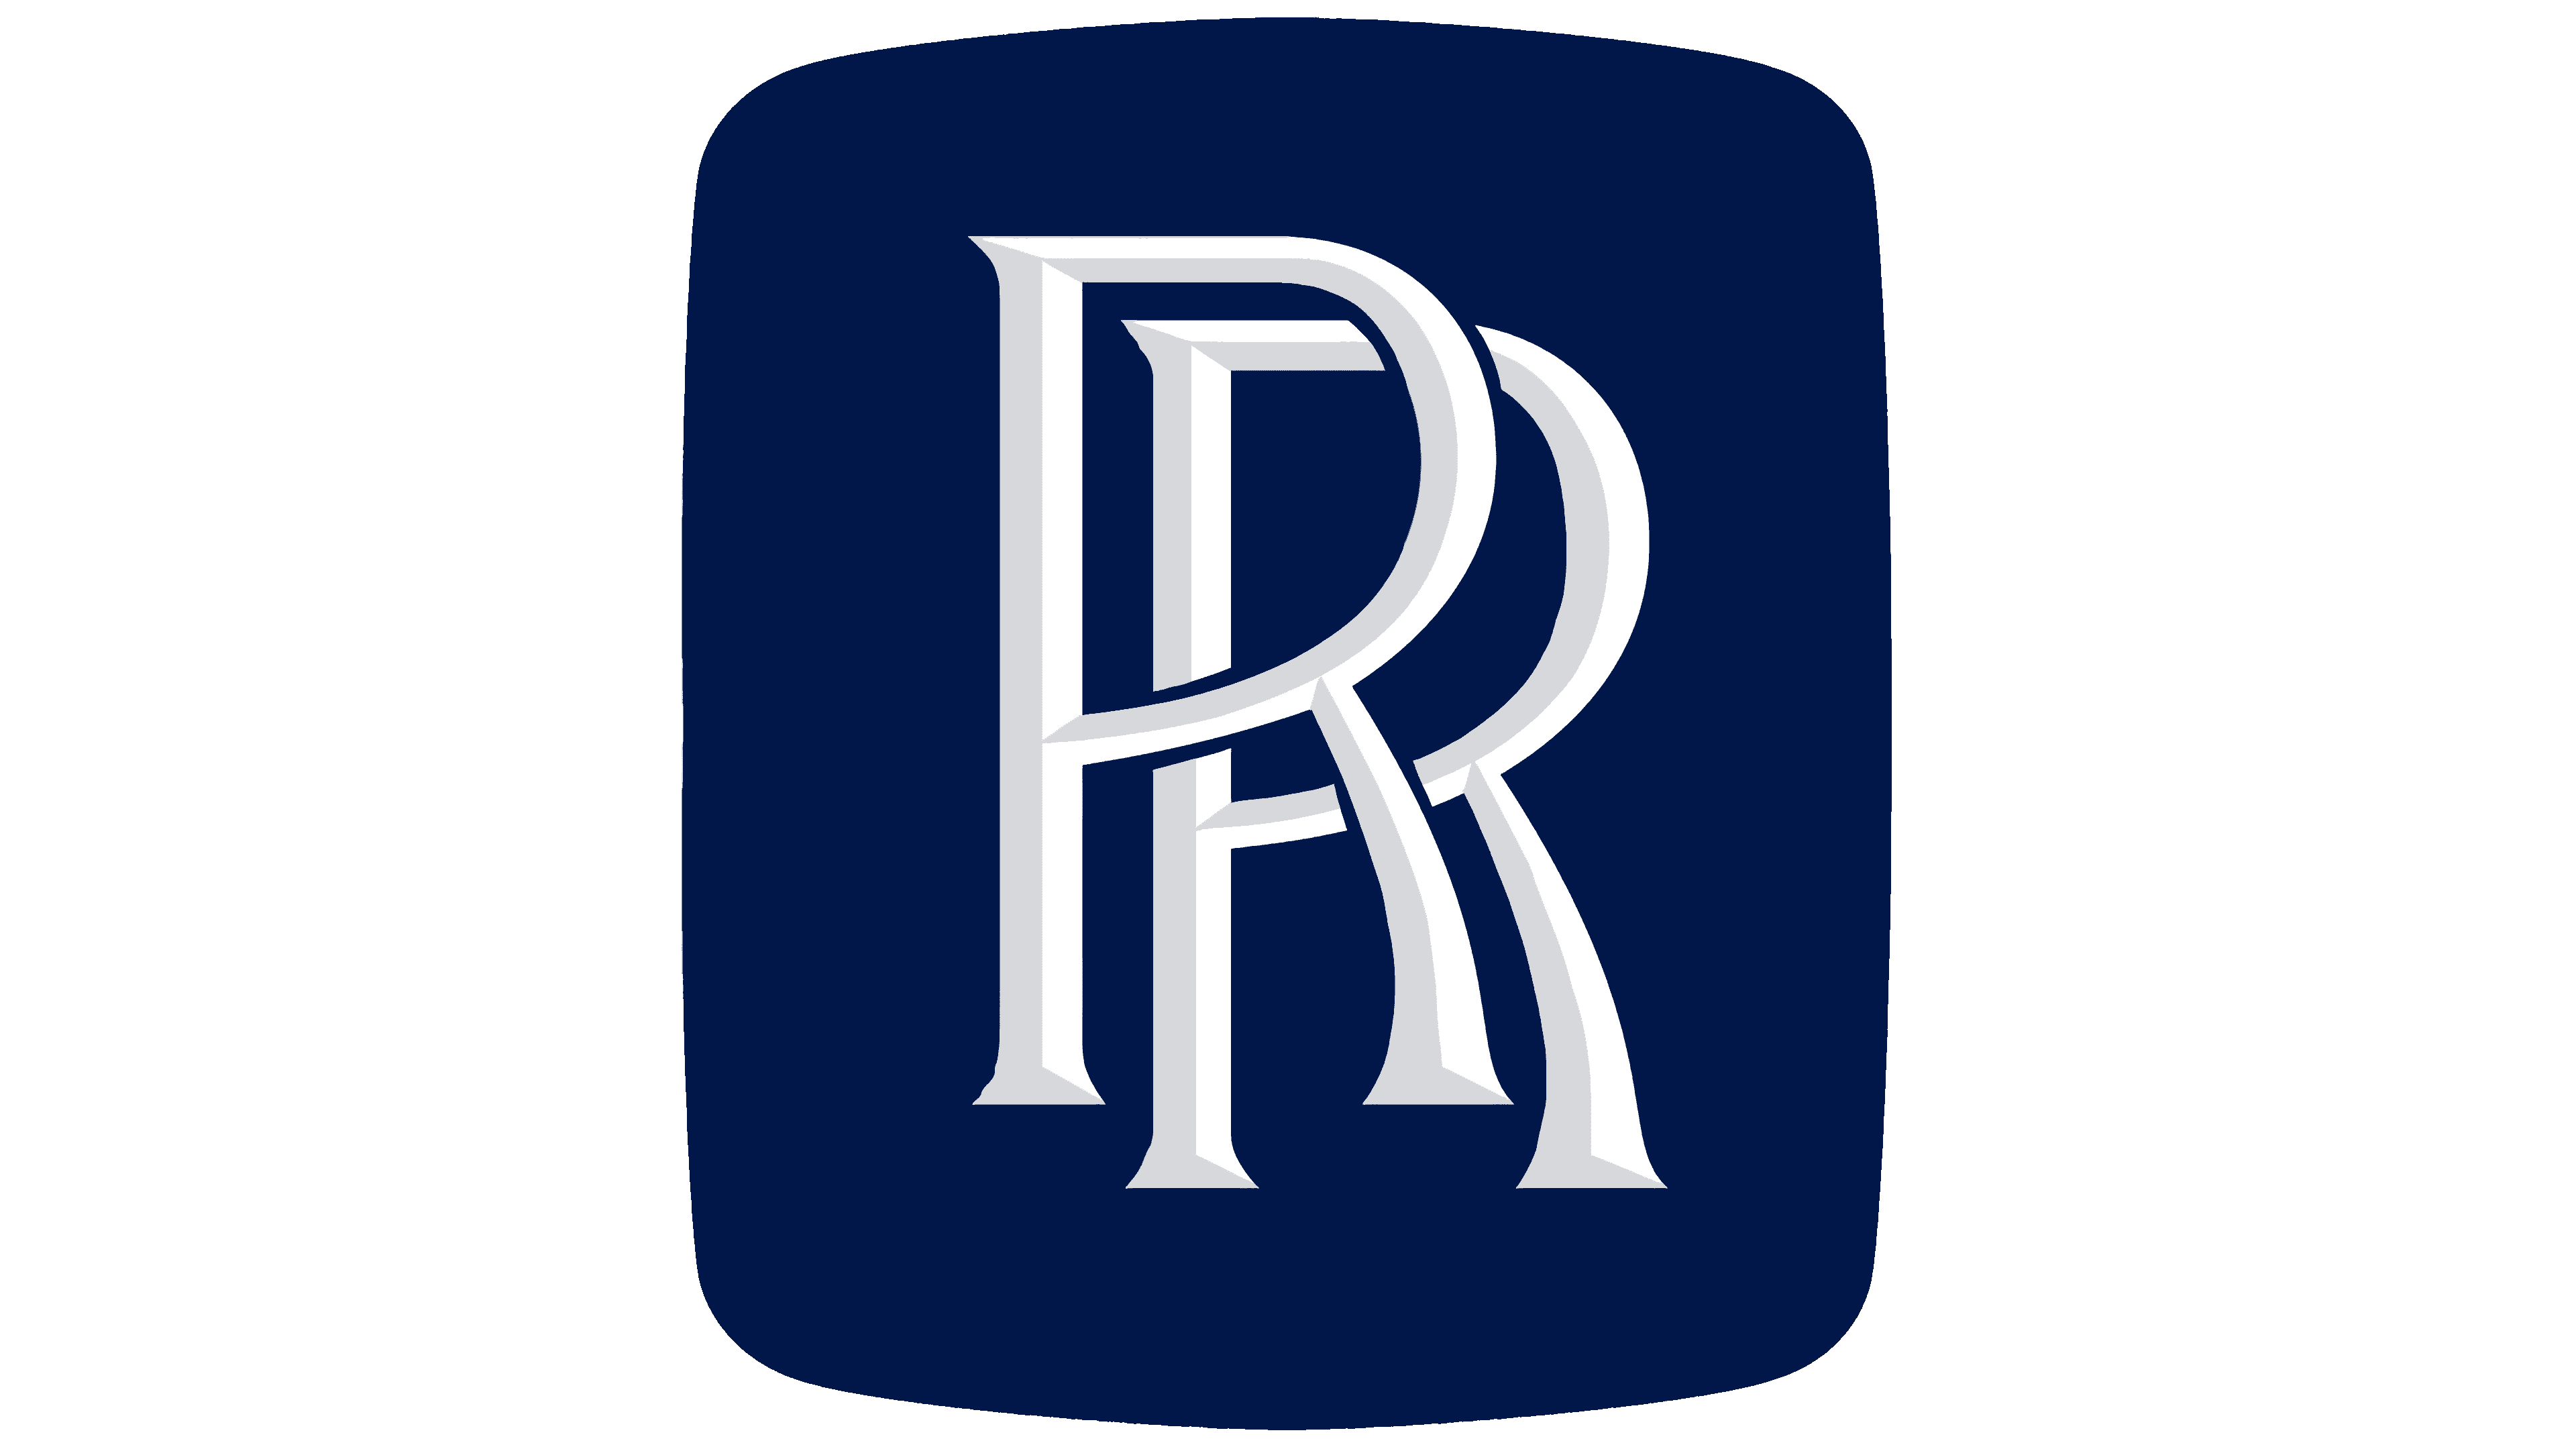 Rolls royce brand logo symbol with name white Vector Image